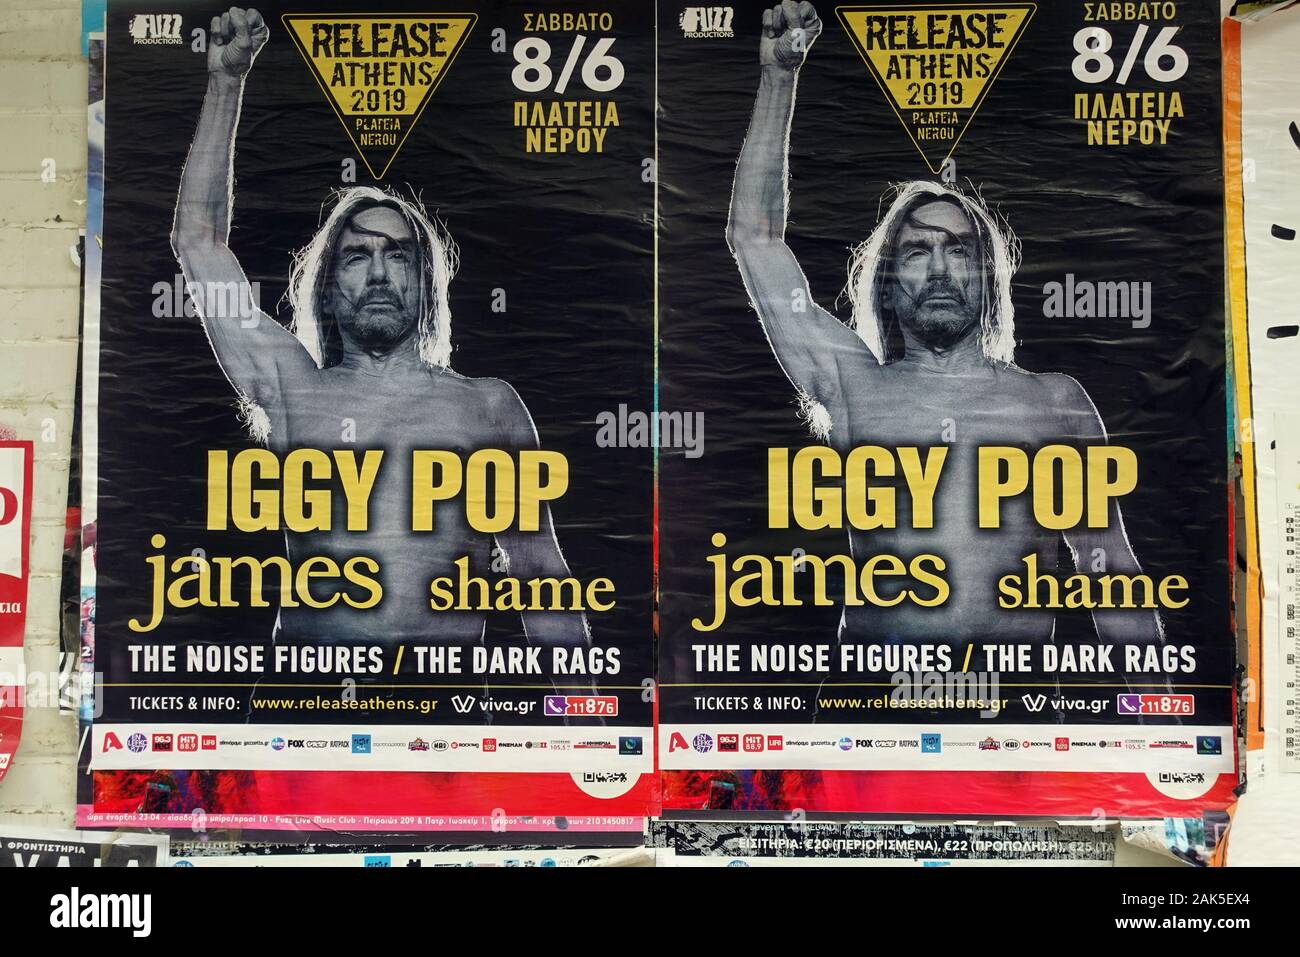 ATHENS, GREECE - MAY 20, 2019: Iggy Pop rock music live concert posters on dirty wall. Stock Photo